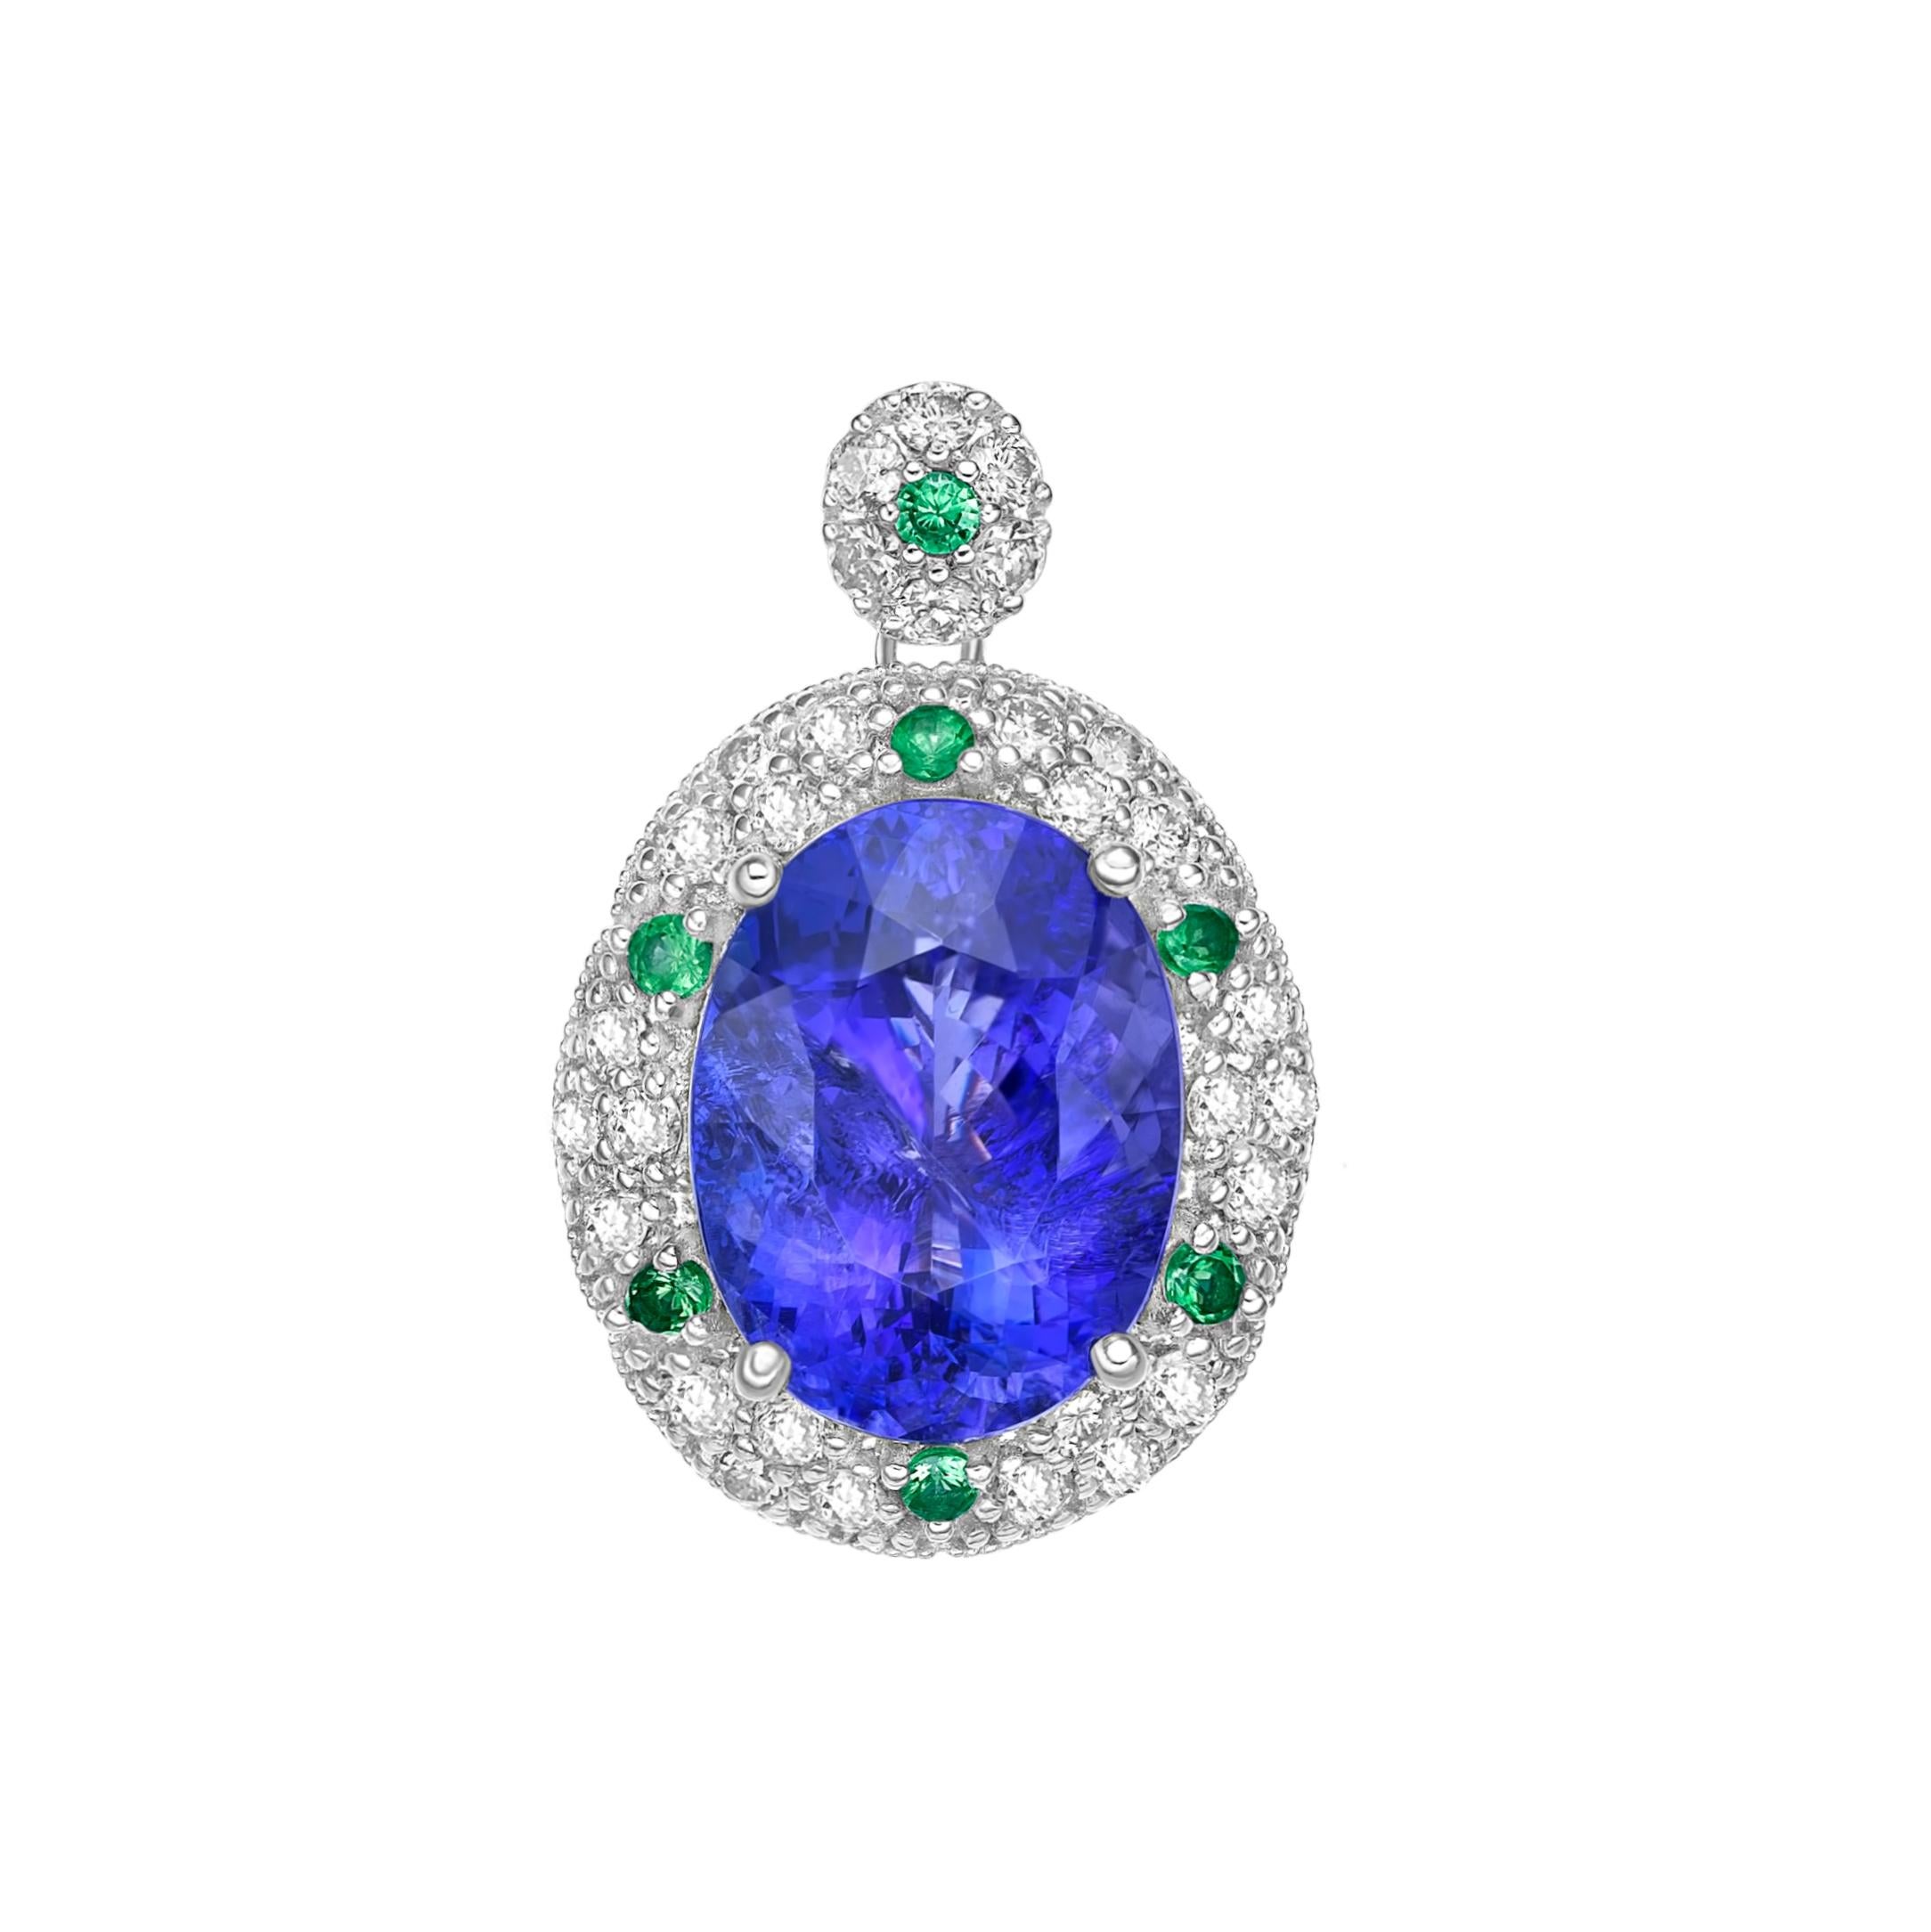 It is a beautiful Tanzanite Pendant in an oval form with a velvety blue colour. The pendant is attractive and suitable for a variety of events. The Tsavorites and Diamonds that surround the Pendant enhance to its beauty and elegance. These lovely